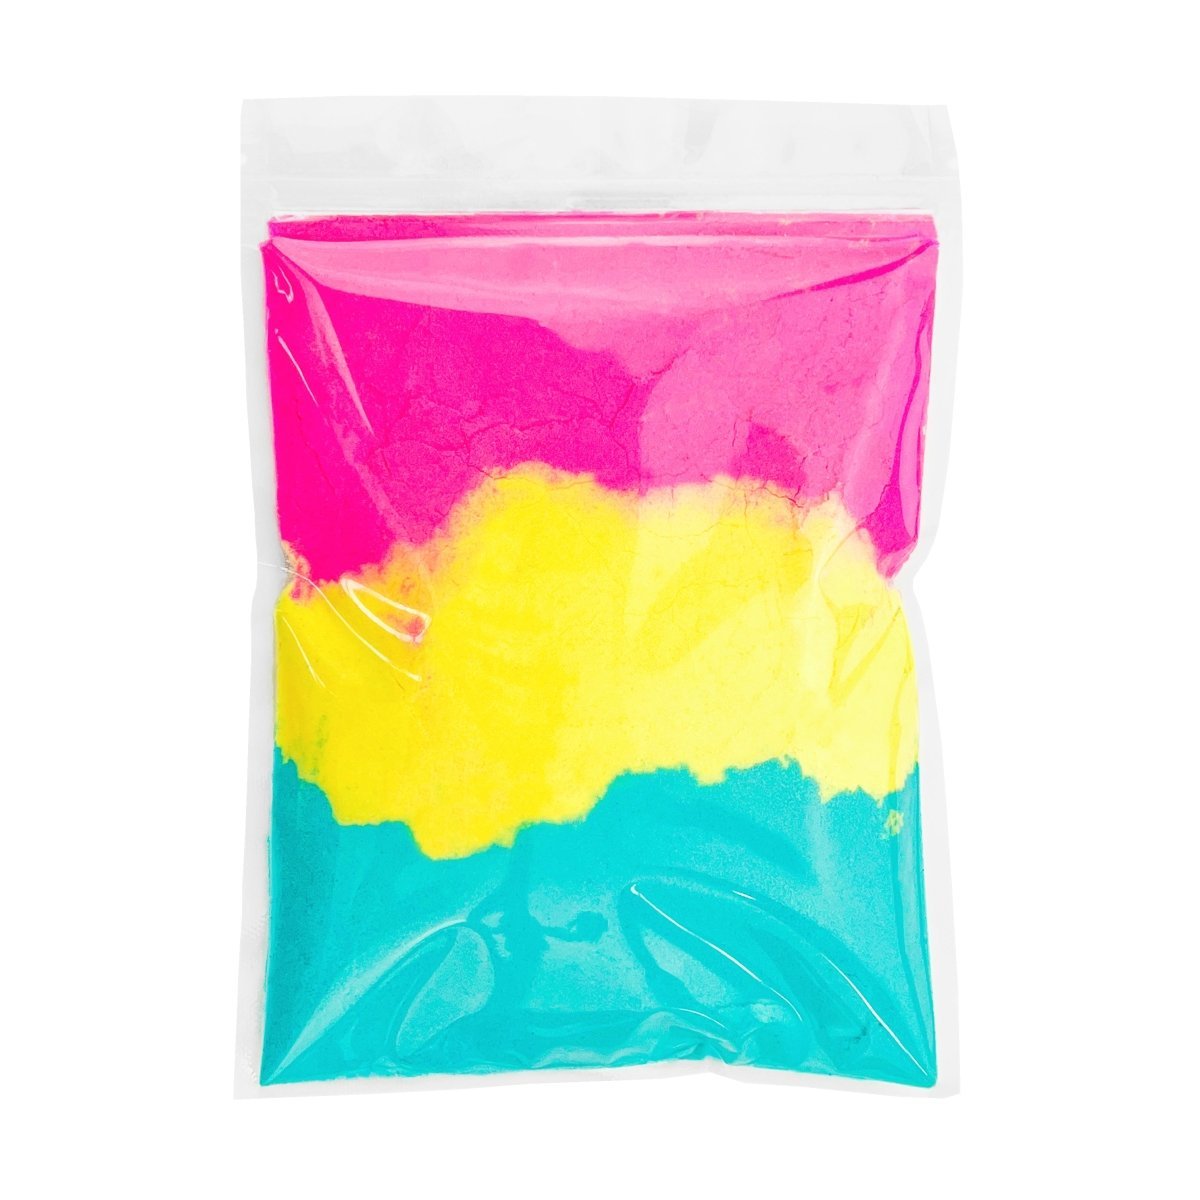 Floss Yourself Bath Dust for Kids & Adults - Colourful Glitters & Cotton Candy Fragrance - Made in Australia by Bath Box